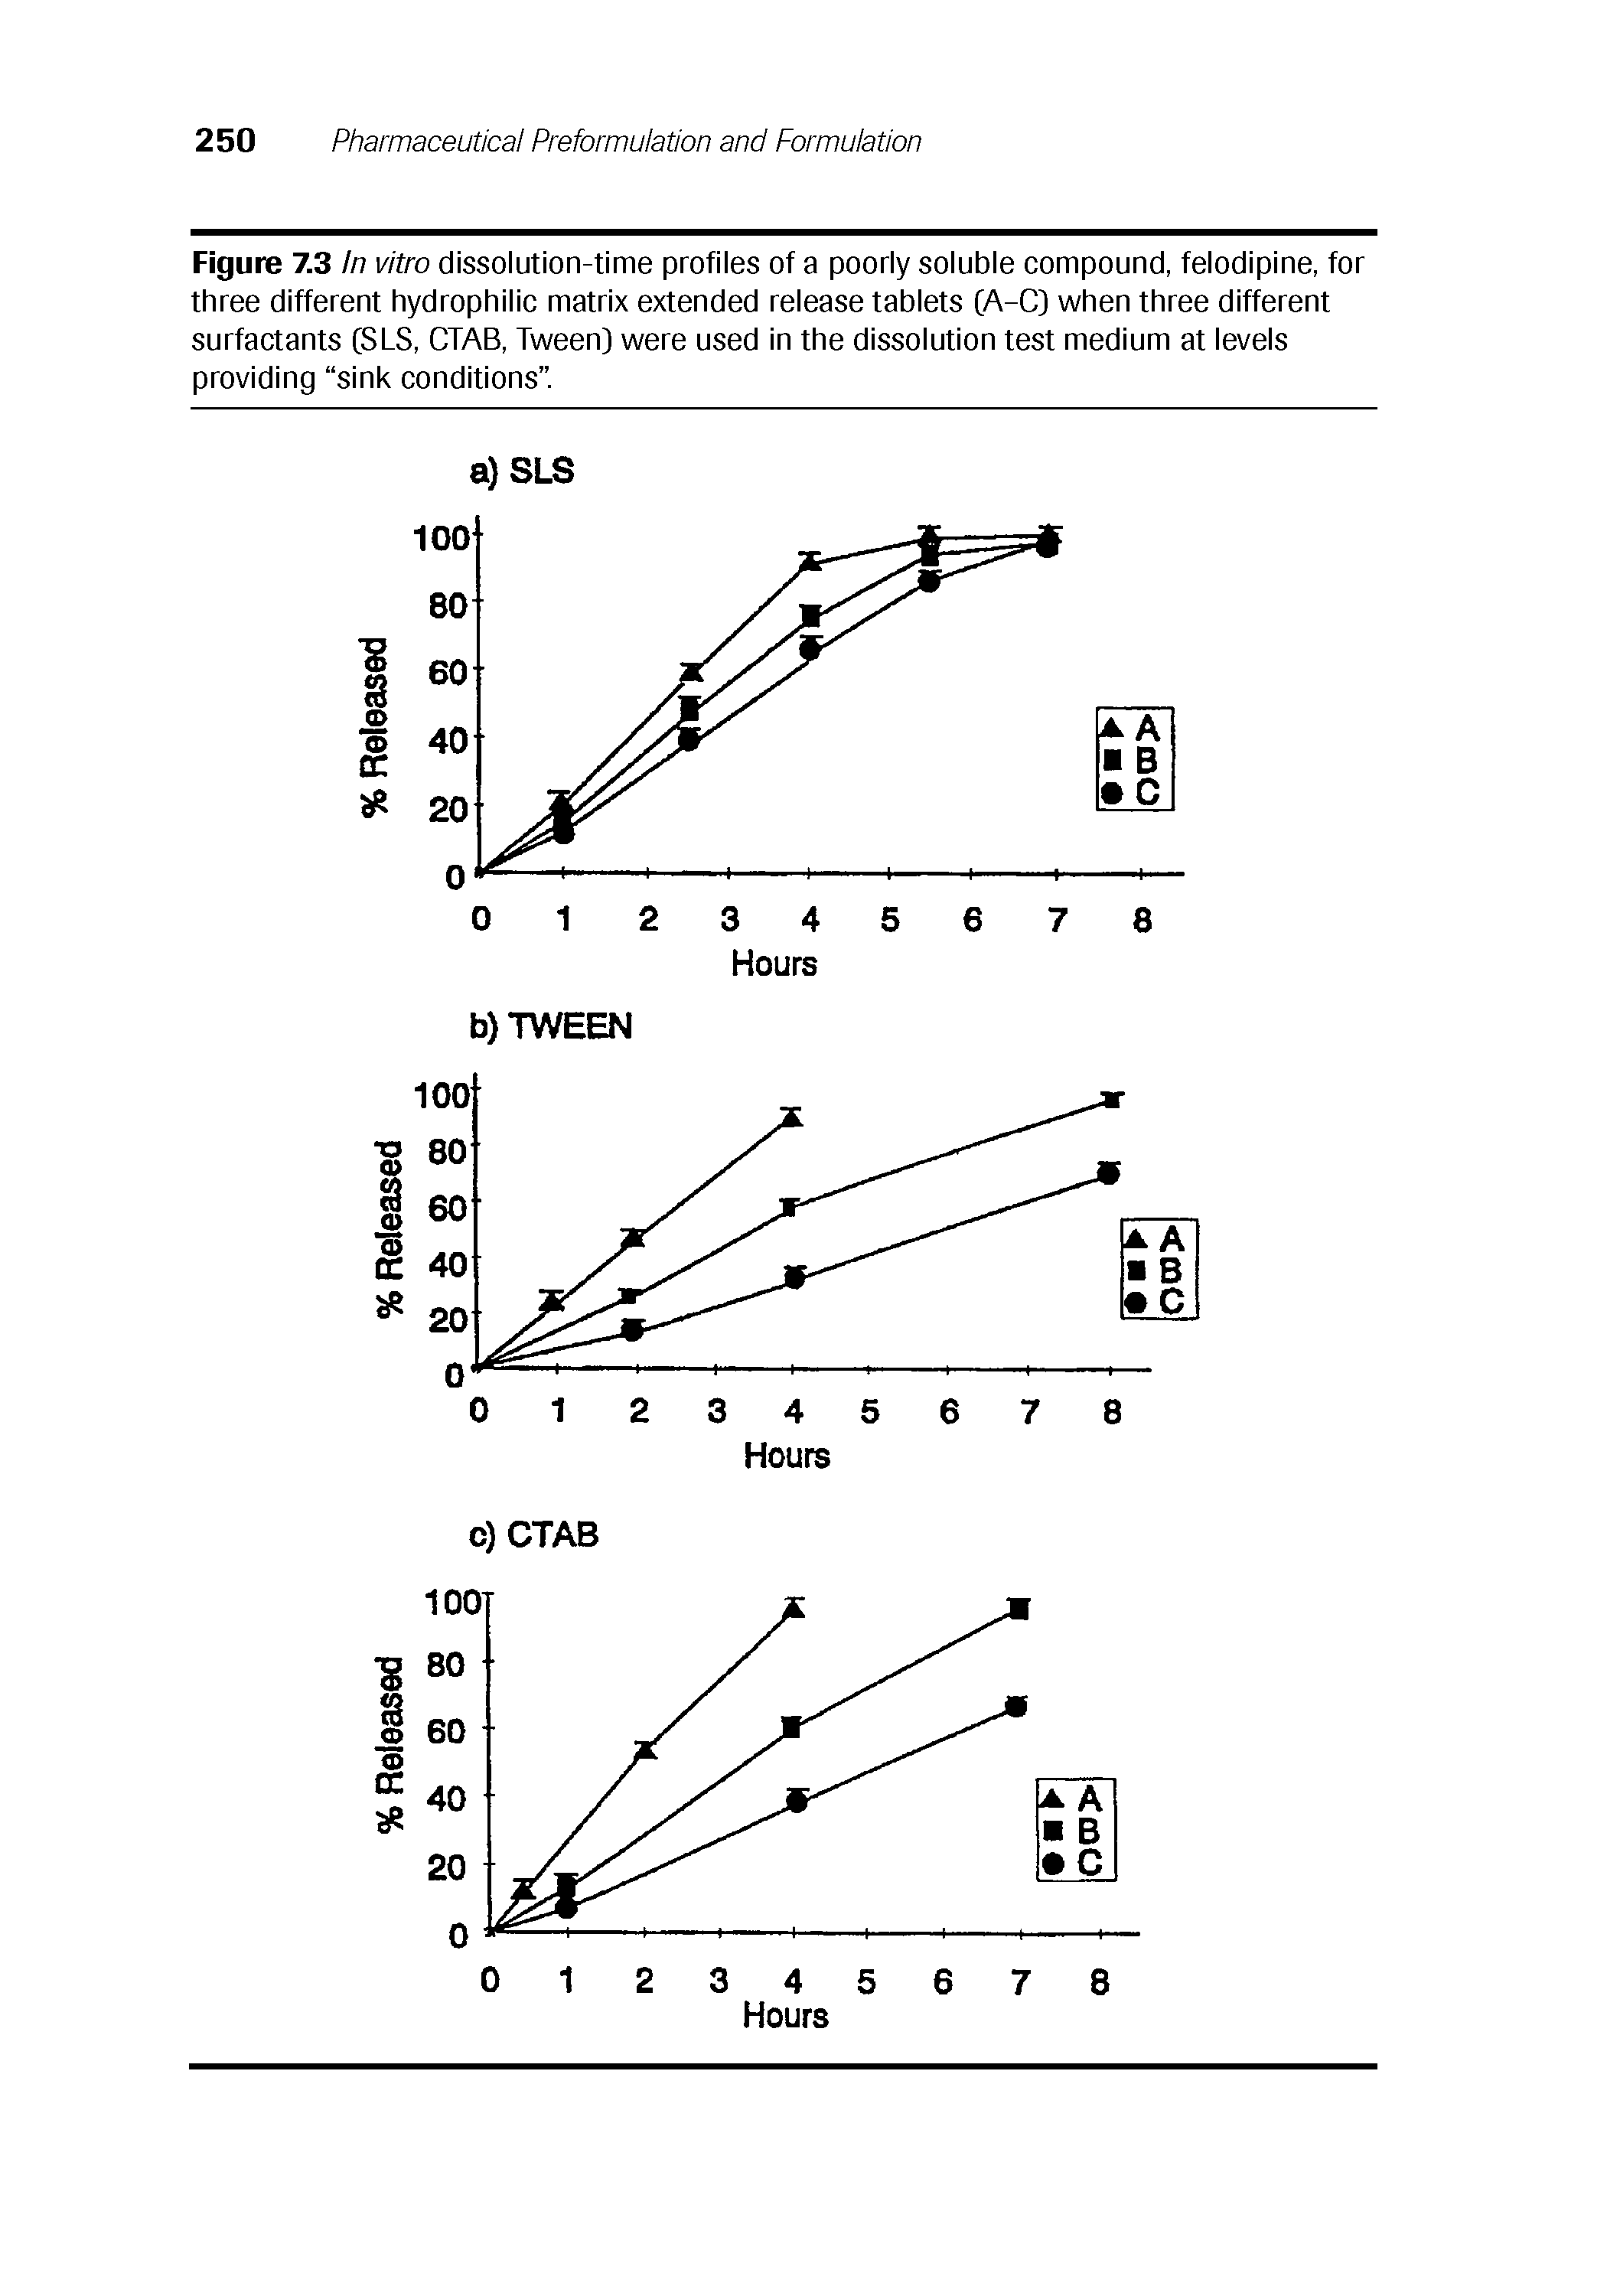 Figure 7.3 In vitro dissolution-time profiles of a poorly soluble compound, felodipine, for three different hydrophilic matrix extended release tablets CA-C) when three different surfactants CSLS, CTAB, Tween) were used in the dissolution test medium at levels providing sink conditions .